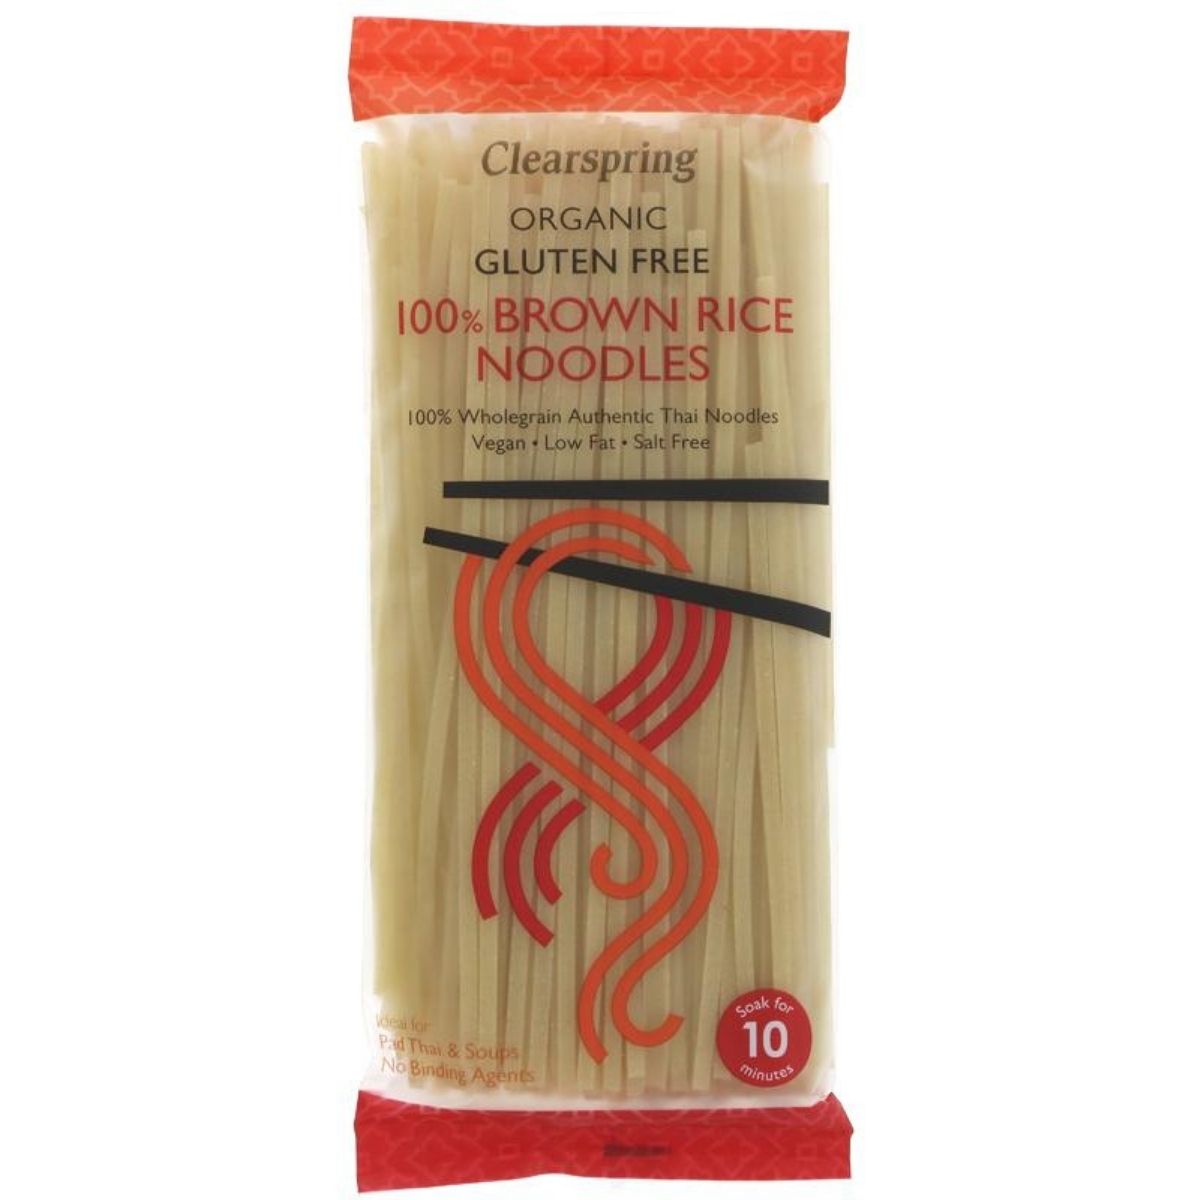 Clearspring Organic Gluten Free 100% Brown Rice Noodles - 200g